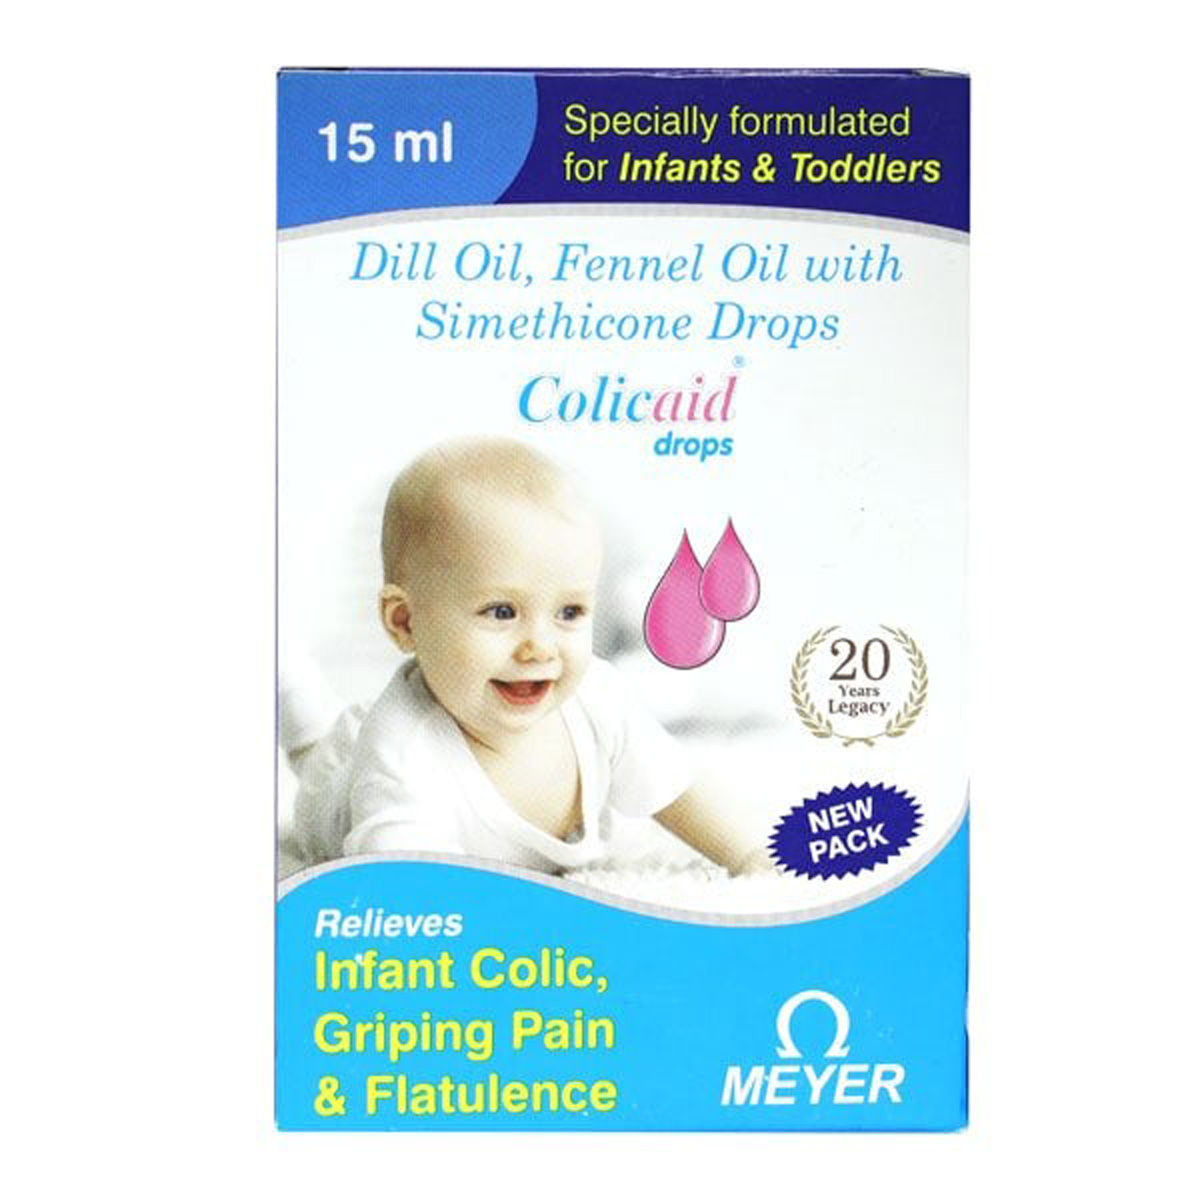 Buy Colicaid Drops 15 ml Online